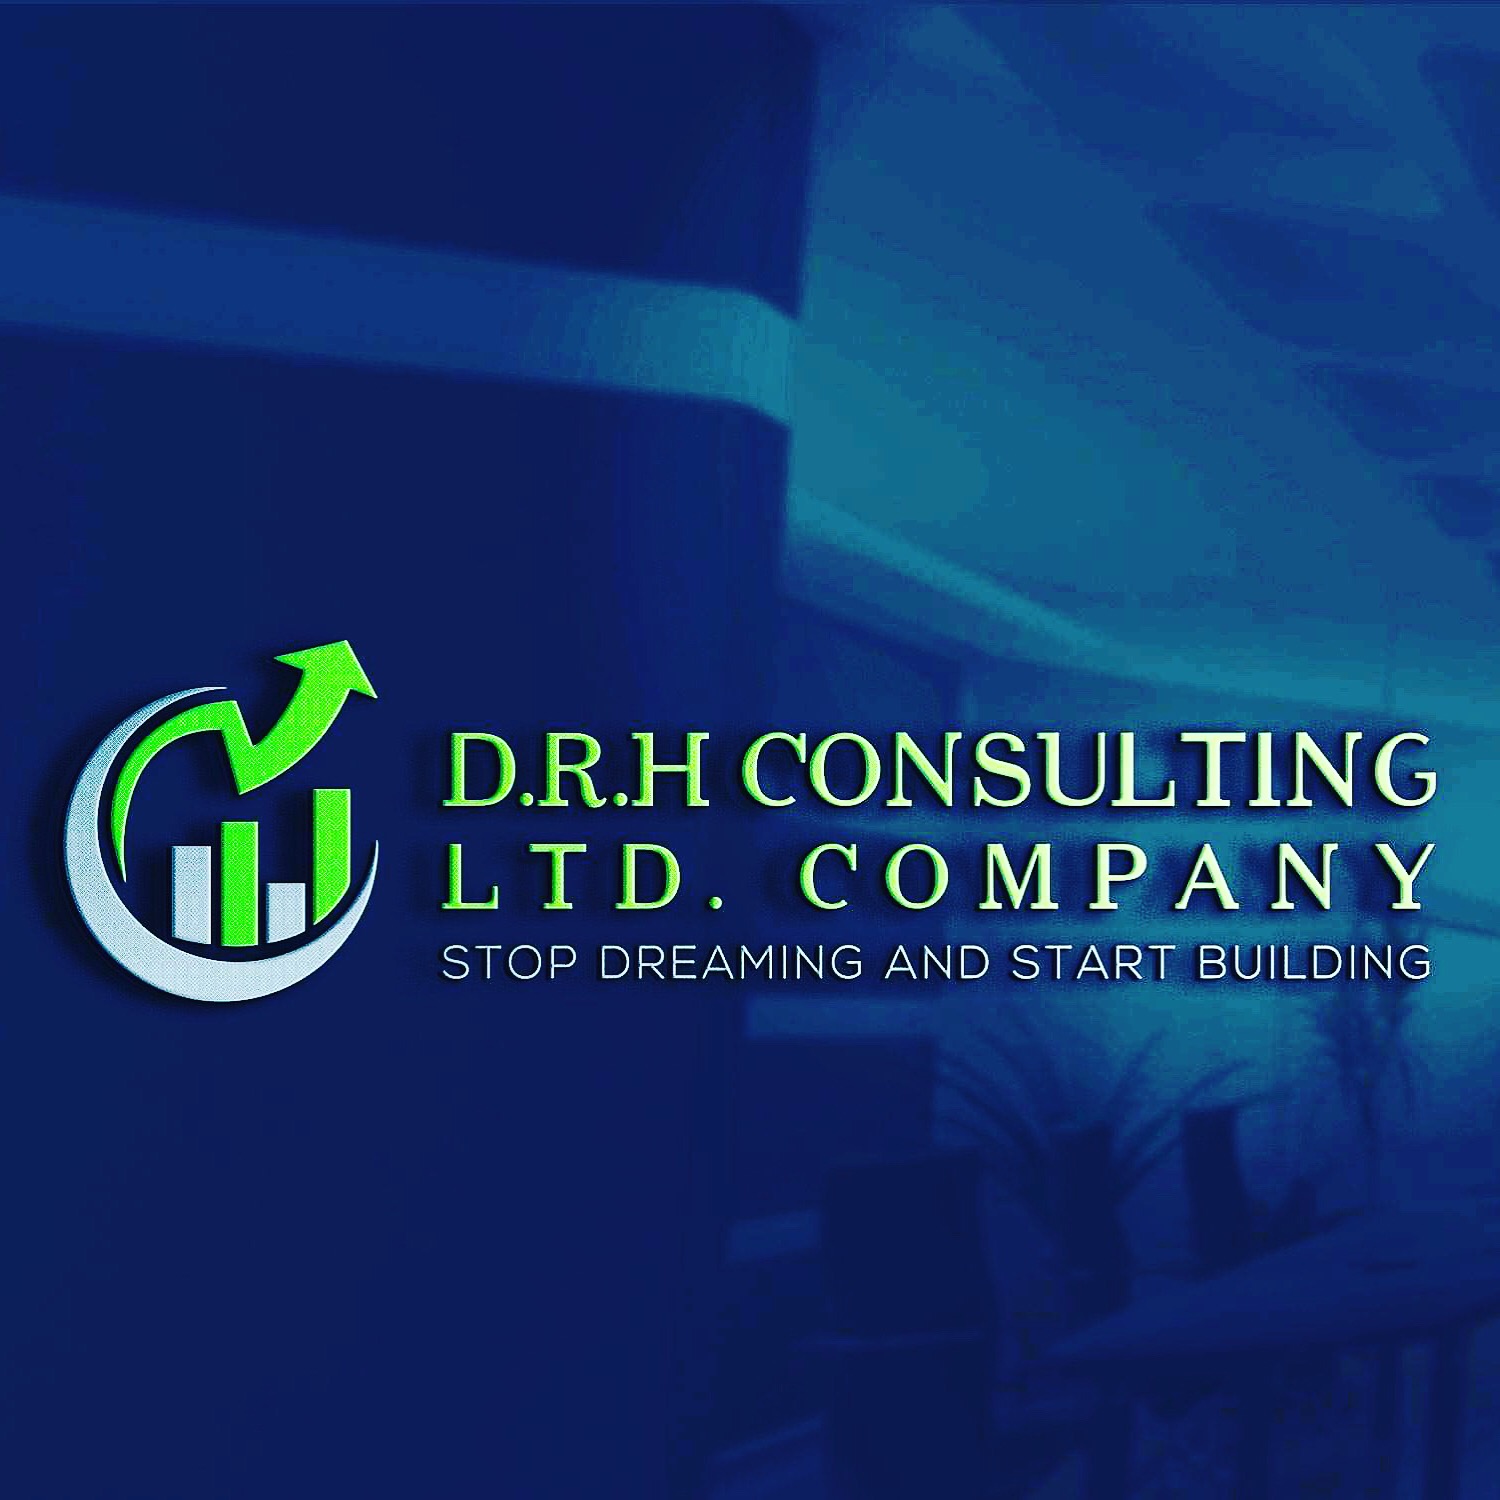 D.R.H. Consulting Ltd. Company